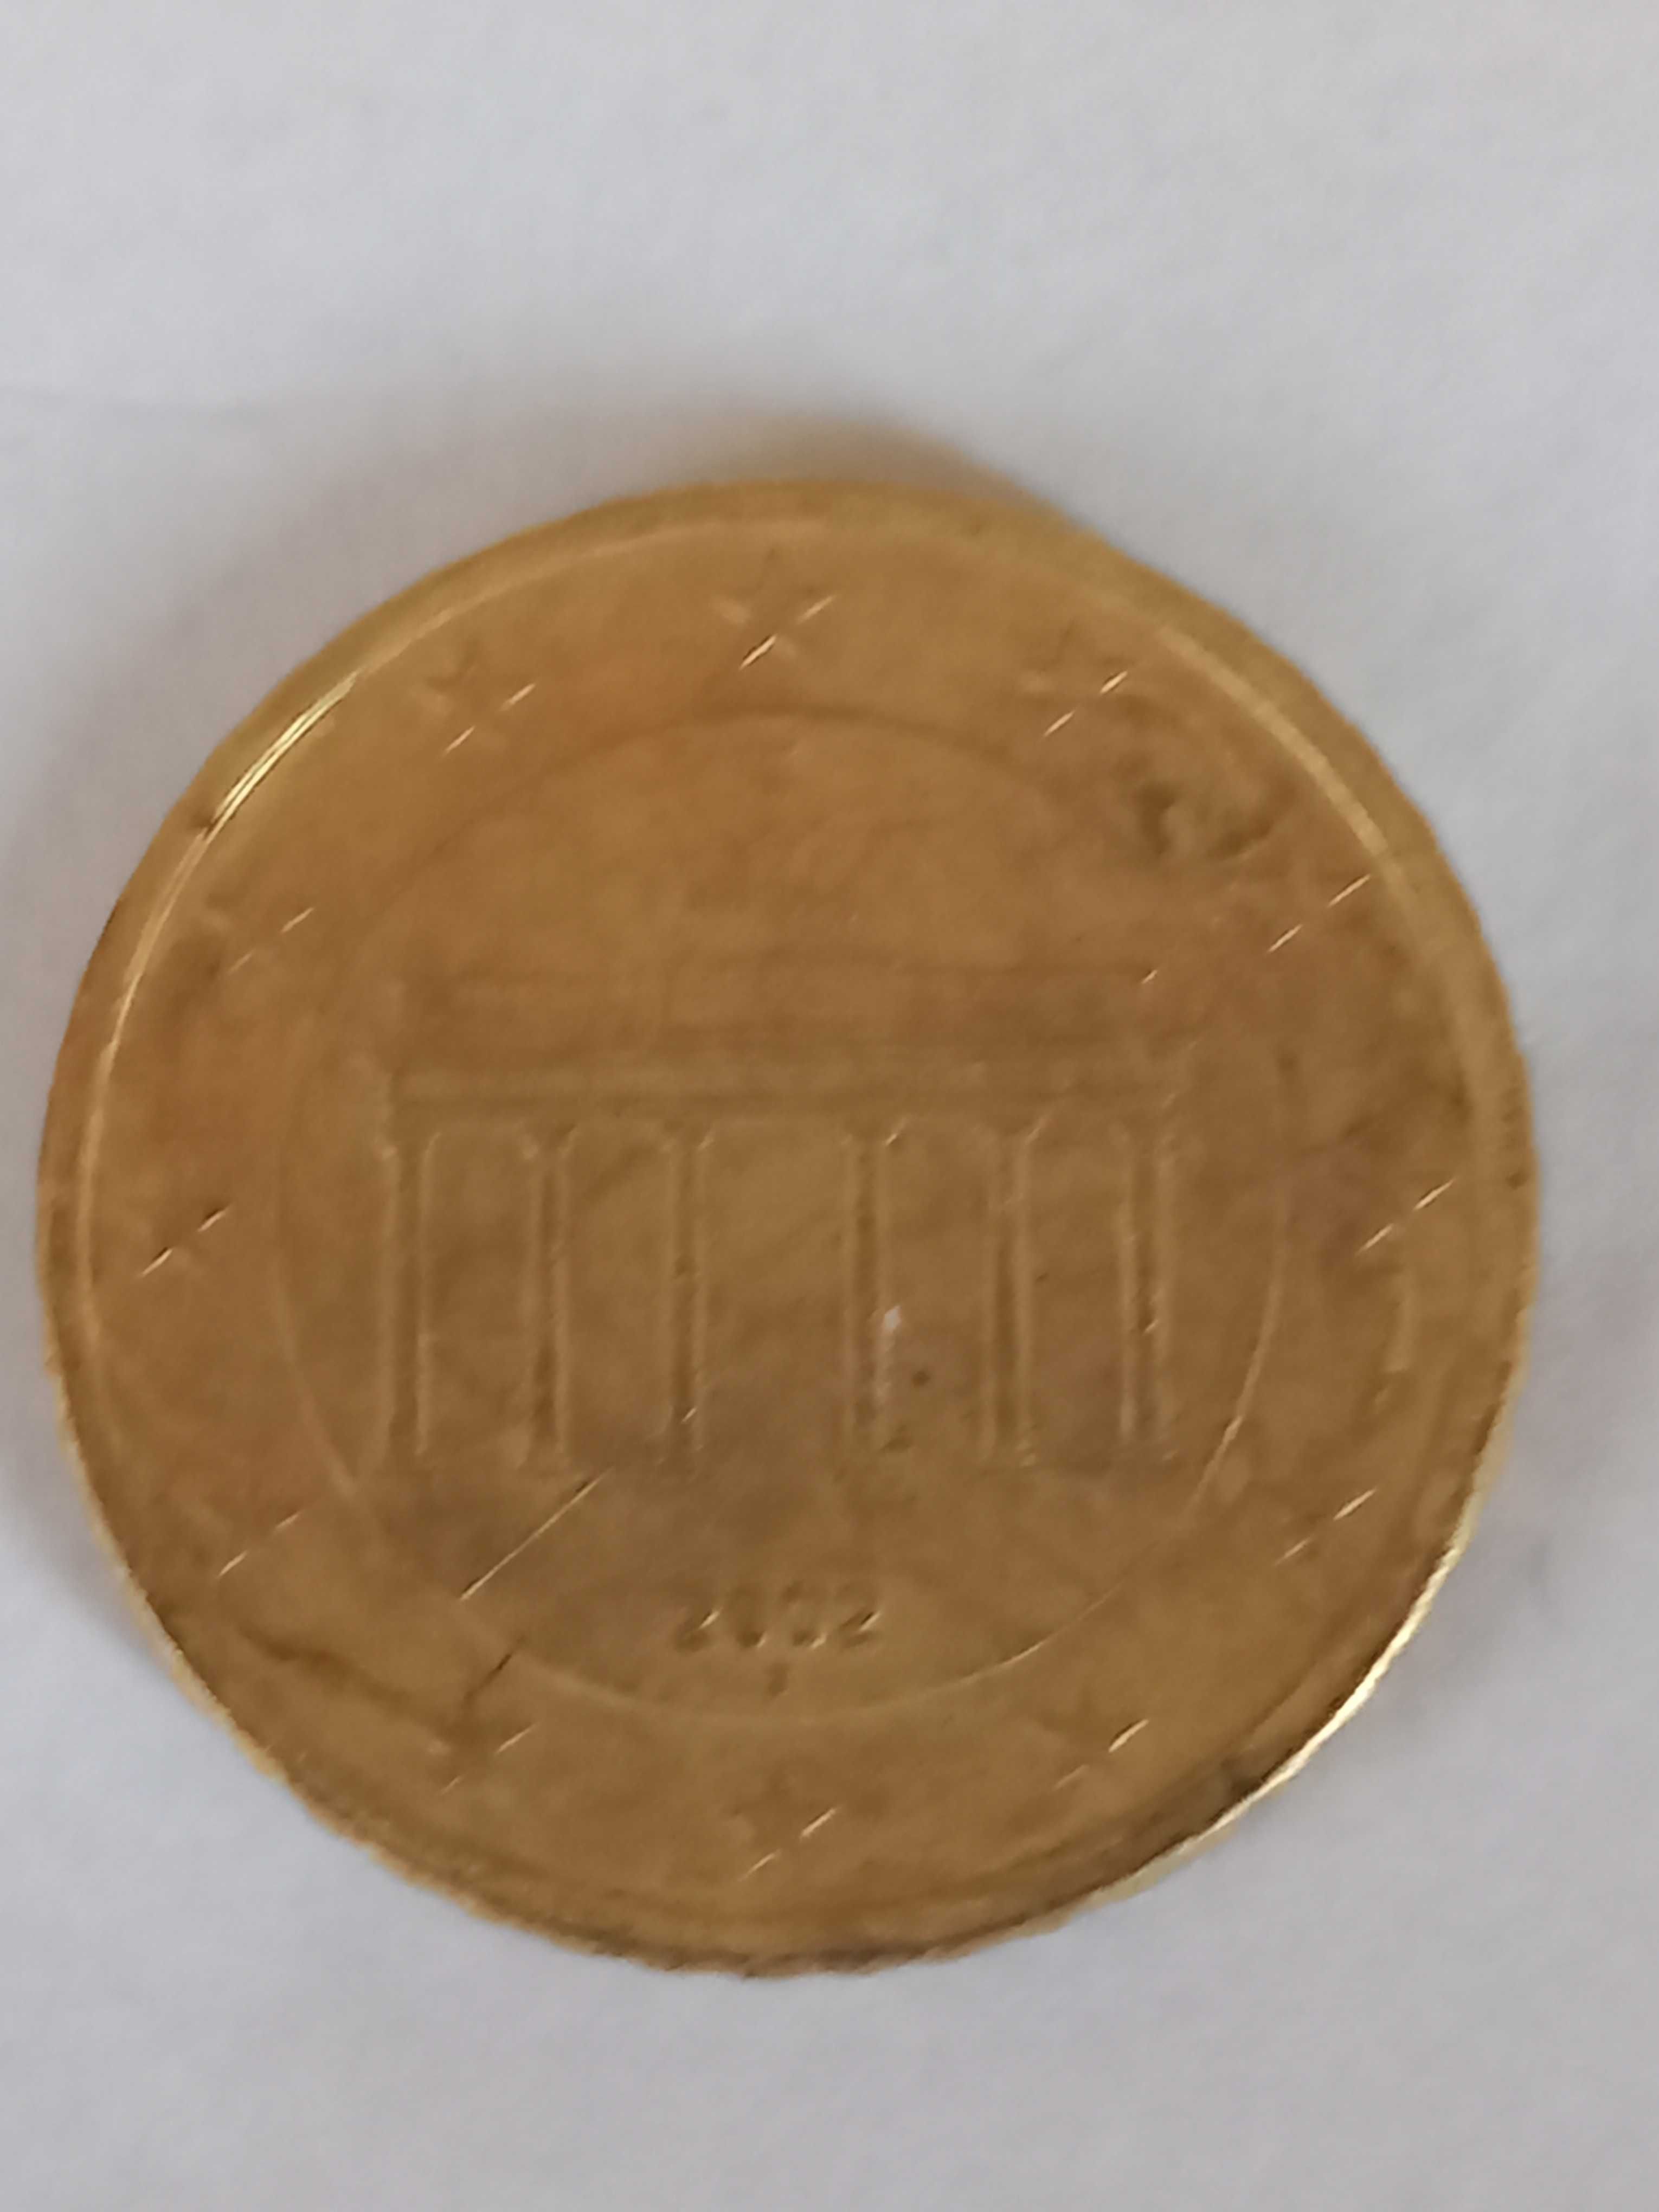 Monede vechi 1989 si euro din2000.2002 si 2007 si50 pence din1997